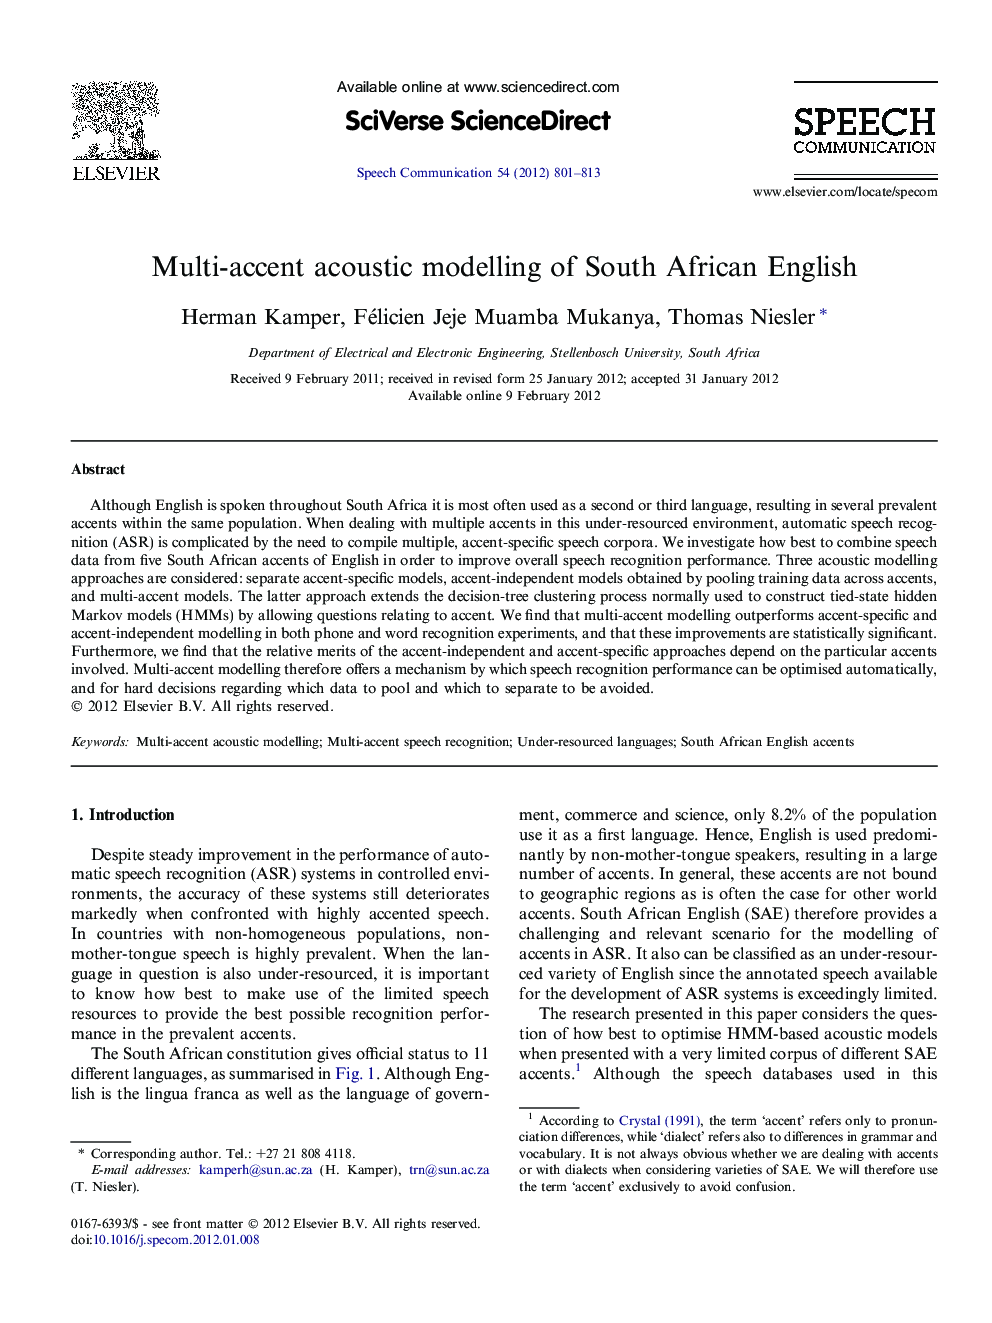 Multi-accent acoustic modelling of South African English